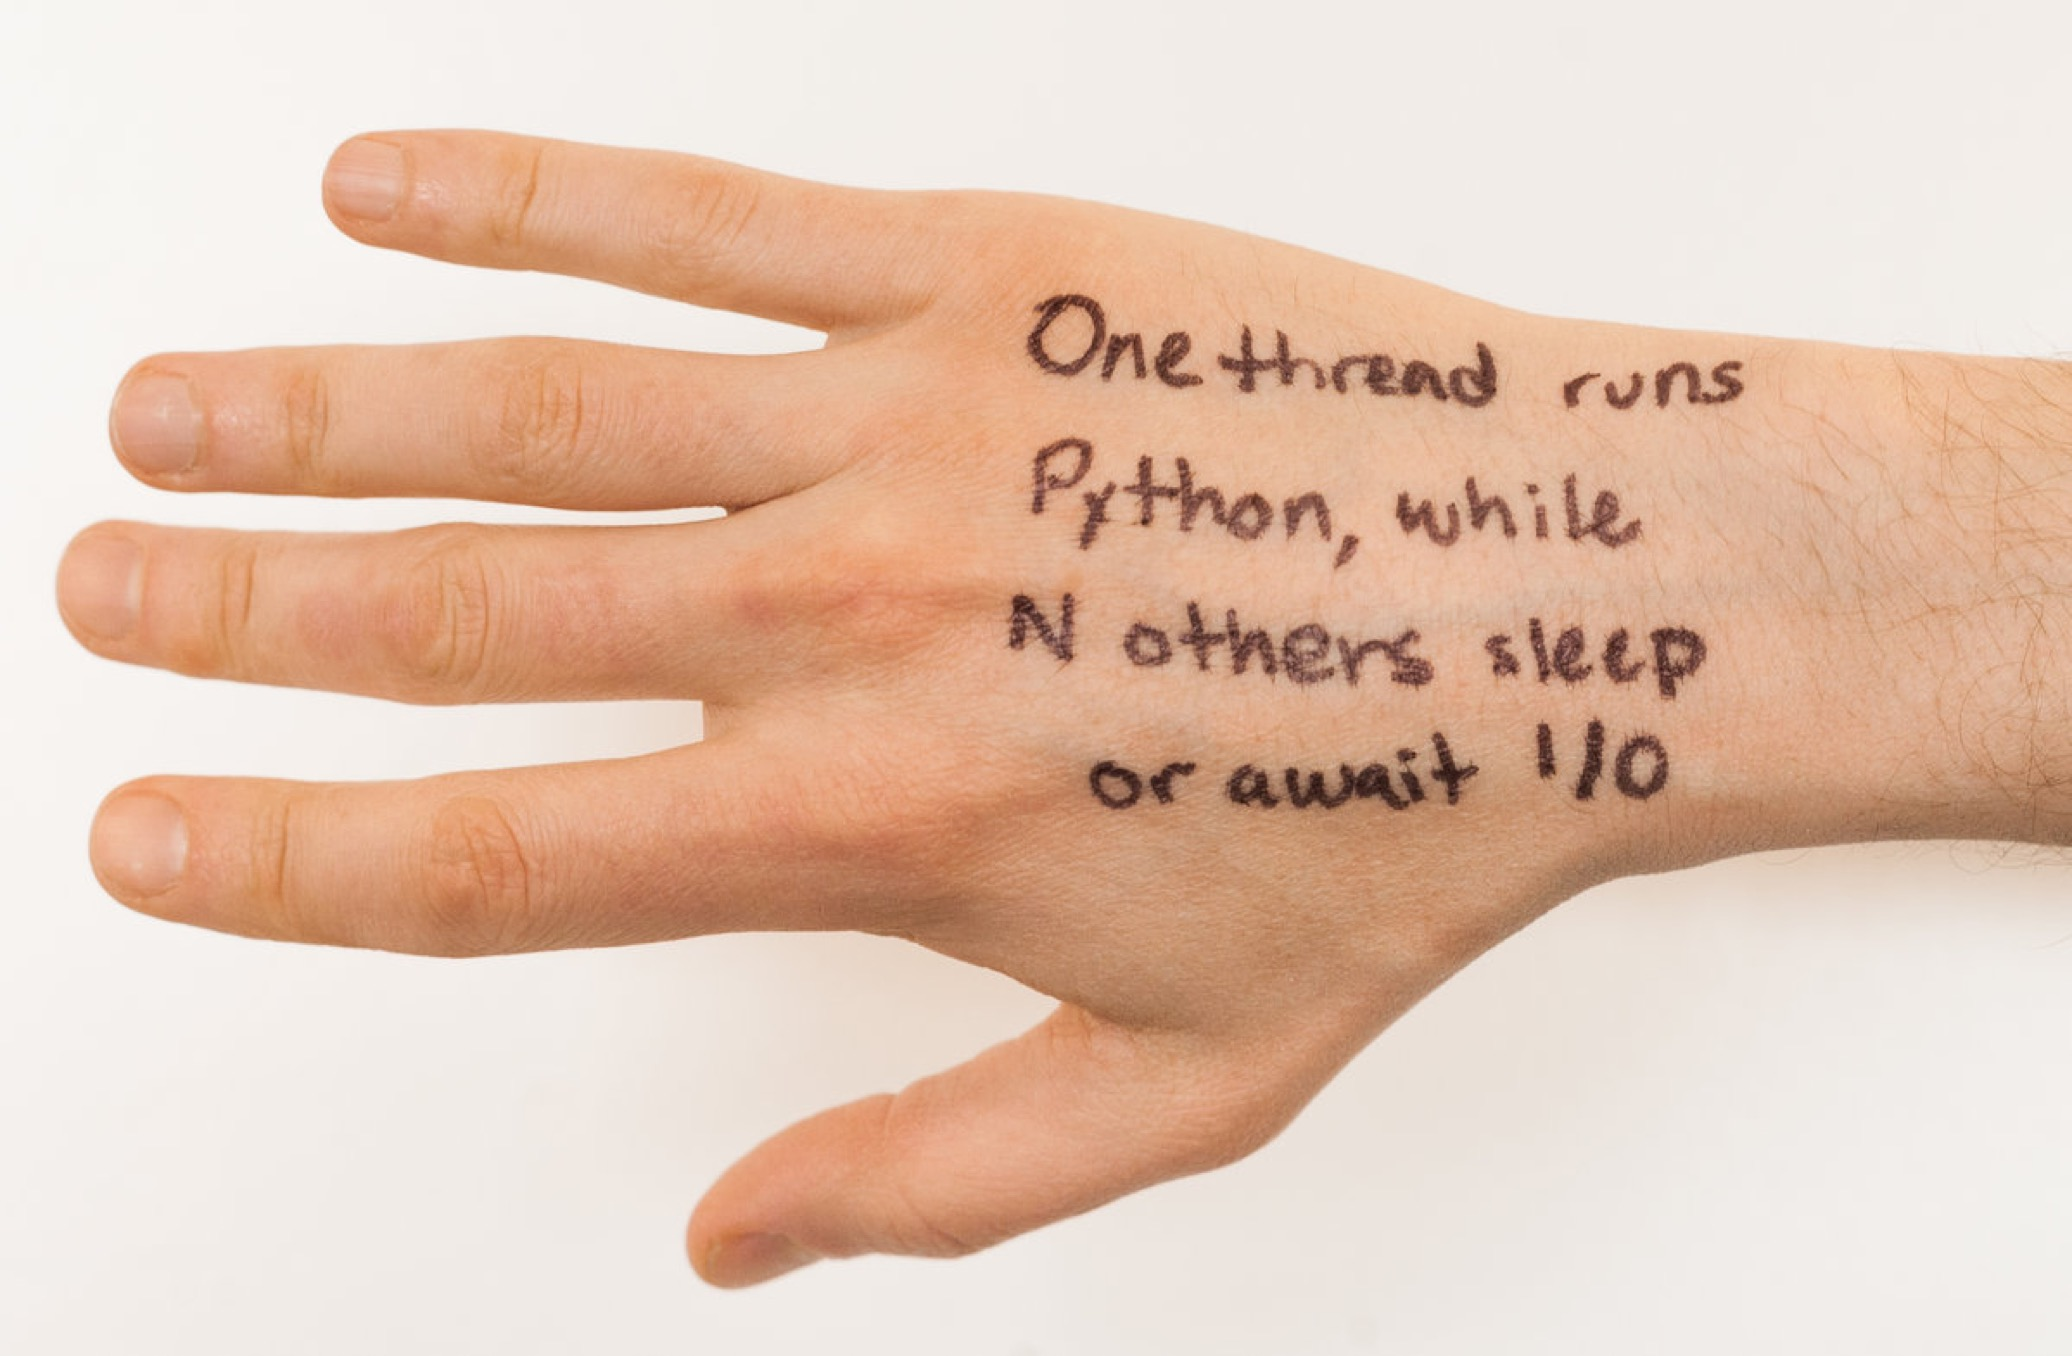 Photo of a hand with the following text written on its back: One thread runs Python, while N others sleep or await I/O.